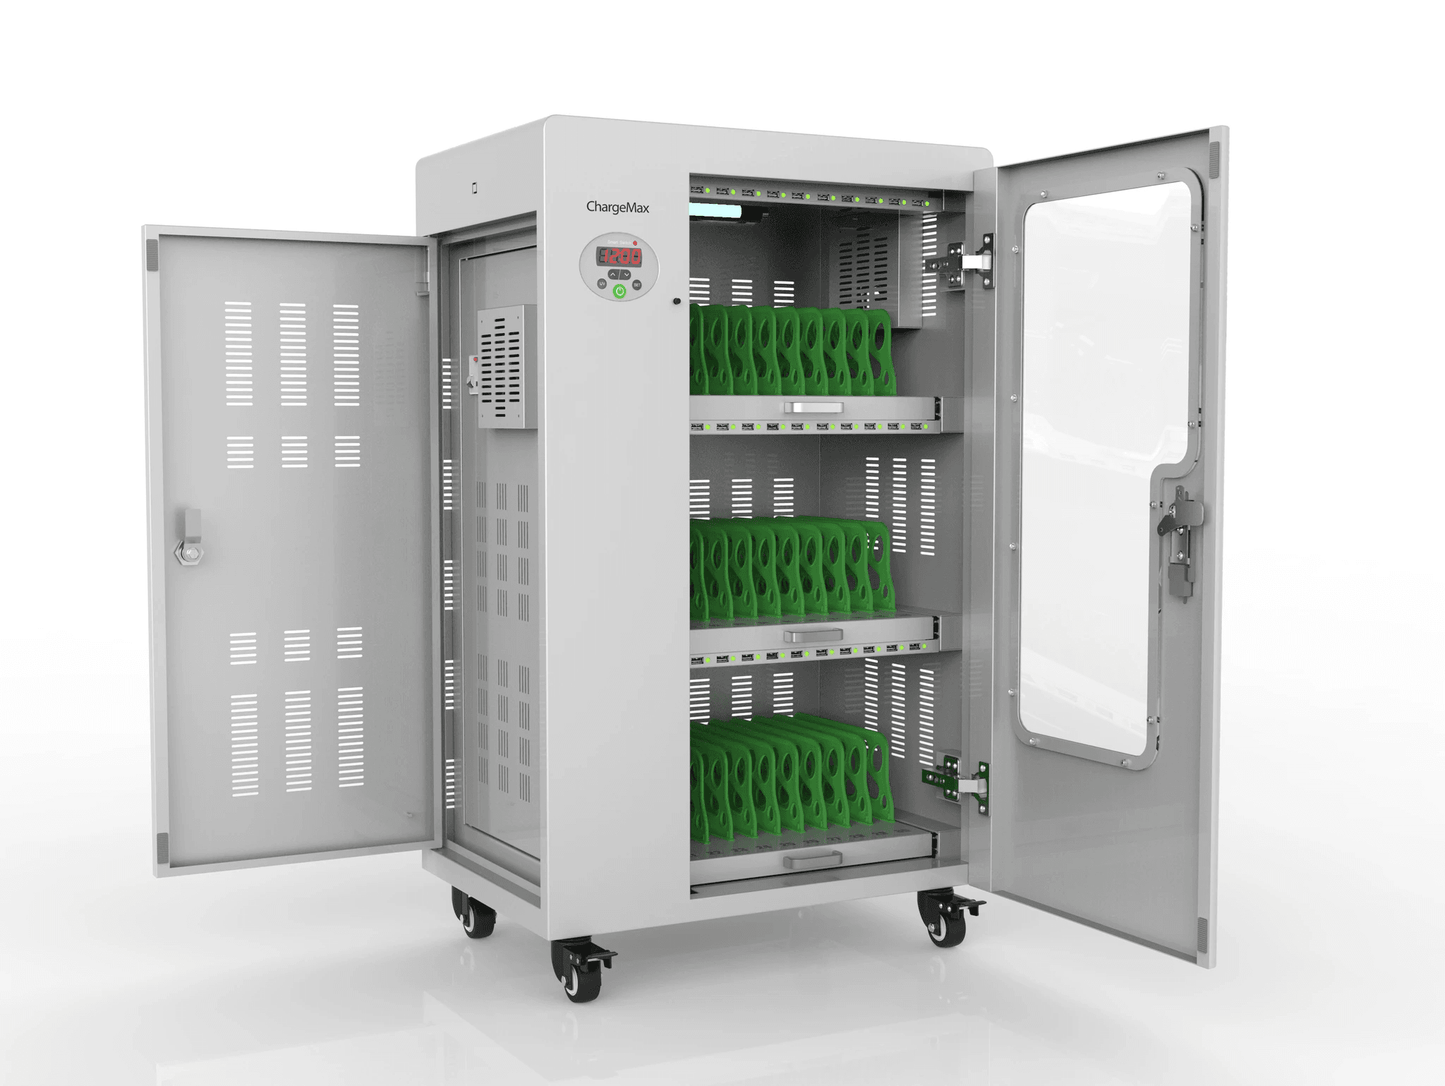 ChargeMax Disinfection Charging Cabinet - 30 bays, 3 Level (CT-30BU). Durable and Safe - USB charging ports are equipped